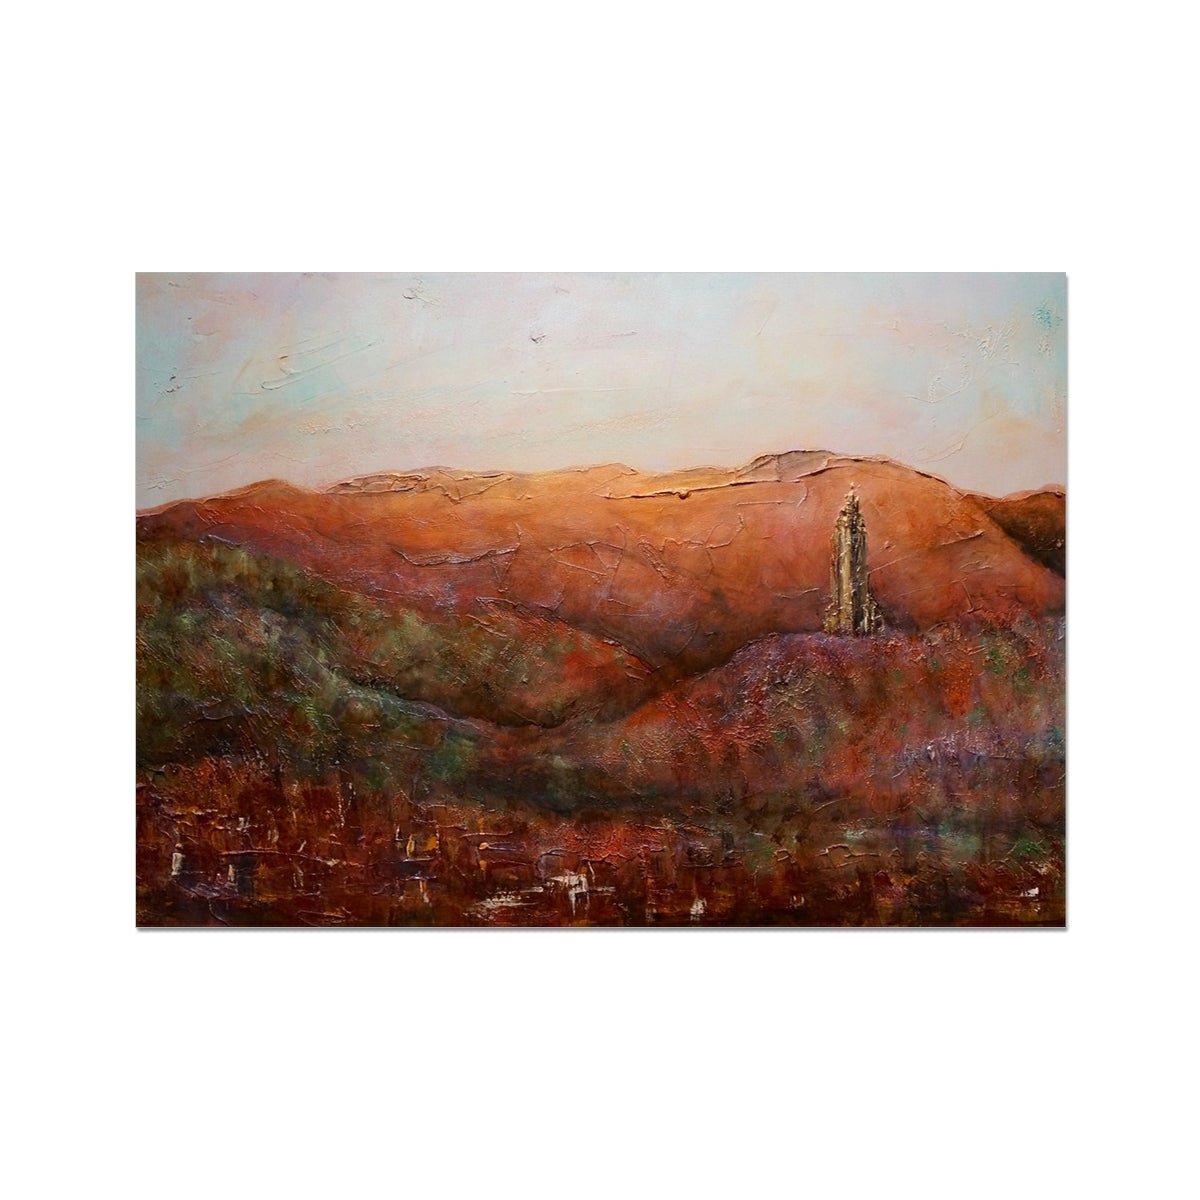 The Wallace Monument Painting | Fine Art Prints From Scotland-Unframed Prints-Historic & Iconic Scotland Art Gallery-A2 Landscape-Paintings, Prints, Homeware, Art Gifts From Scotland By Scottish Artist Kevin Hunter